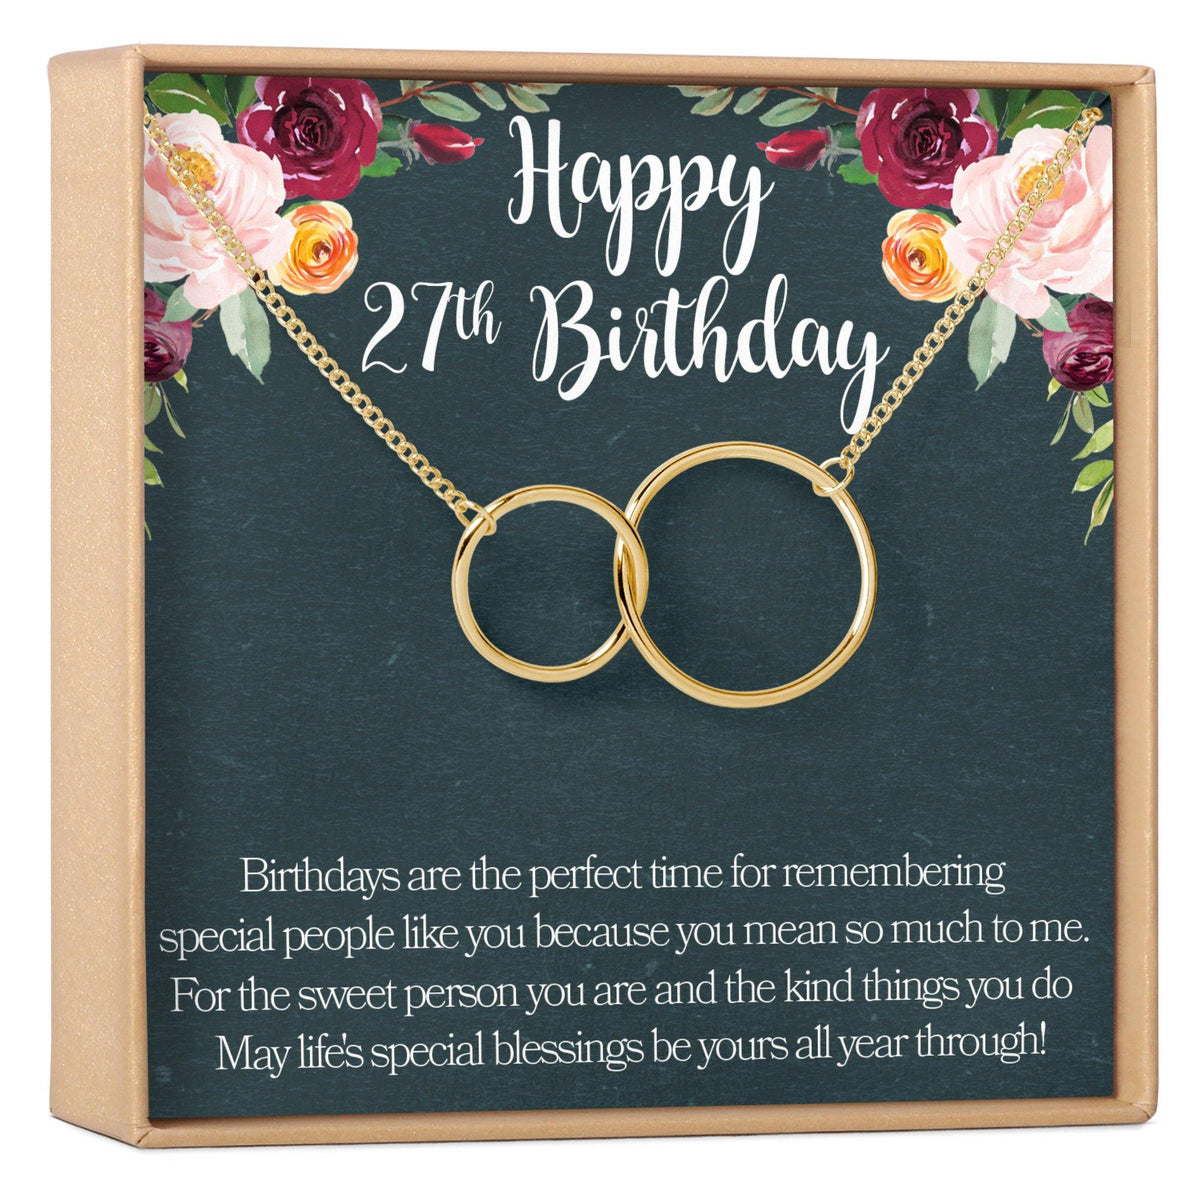 27th Birthday Necklace - Dear Ava, Jewelry / Necklaces / Pendants